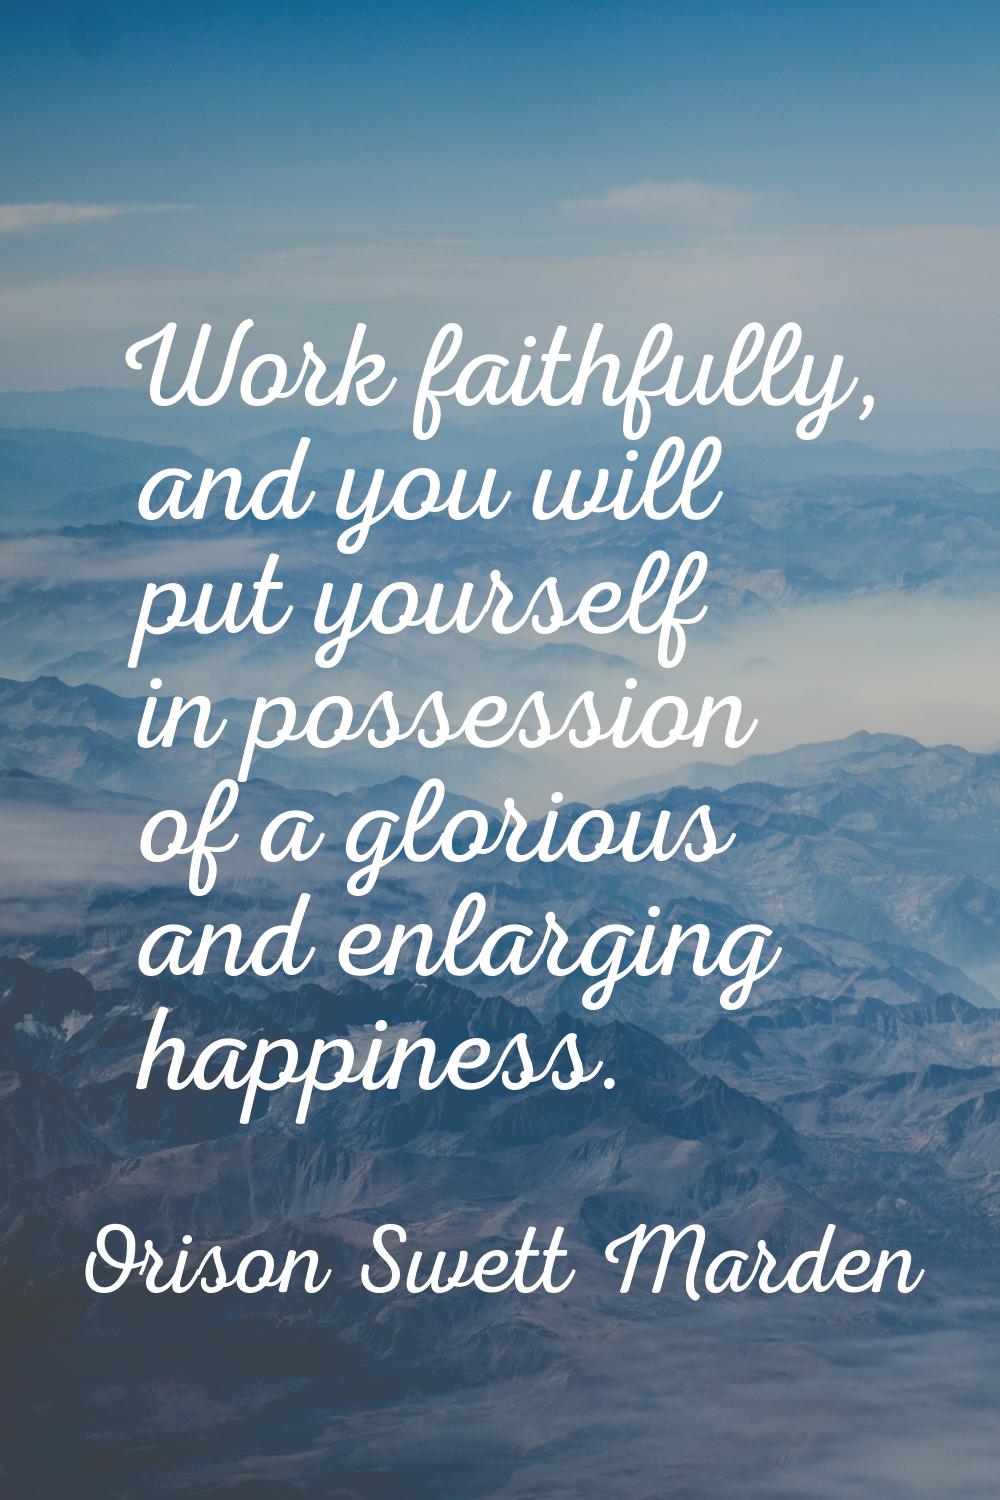 Work faithfully, and you will put yourself in possession of a glorious and enlarging happiness.